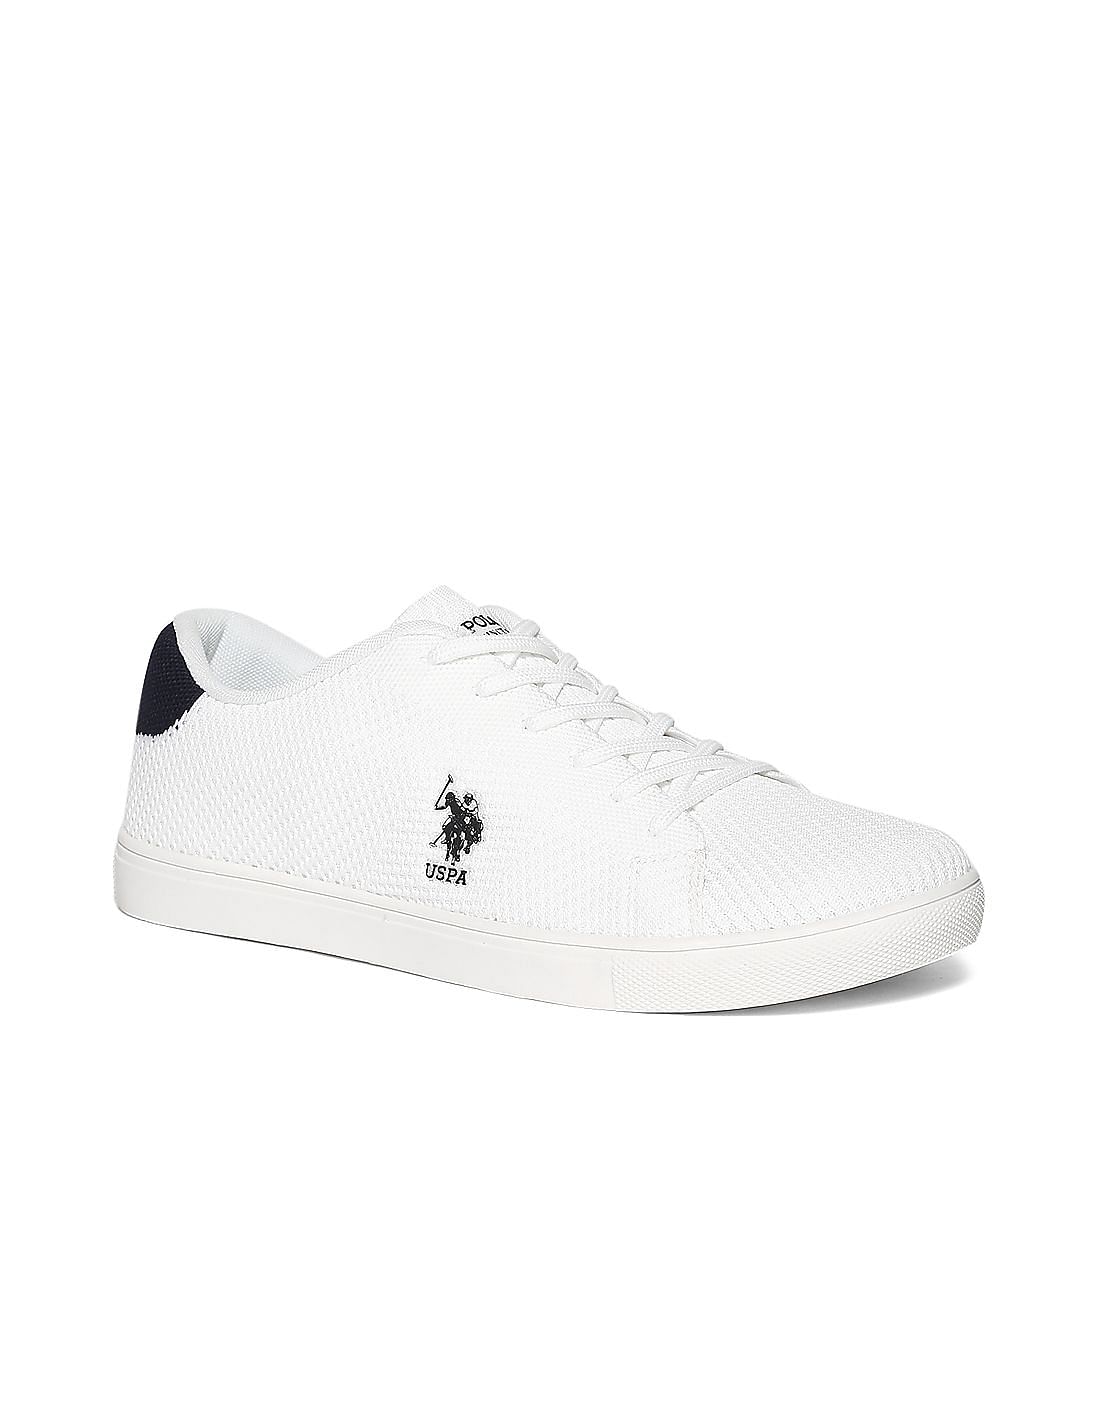 Buy U.S. Polo Assn. Knit Lace Up Perico Sneakers - NNNOW.com